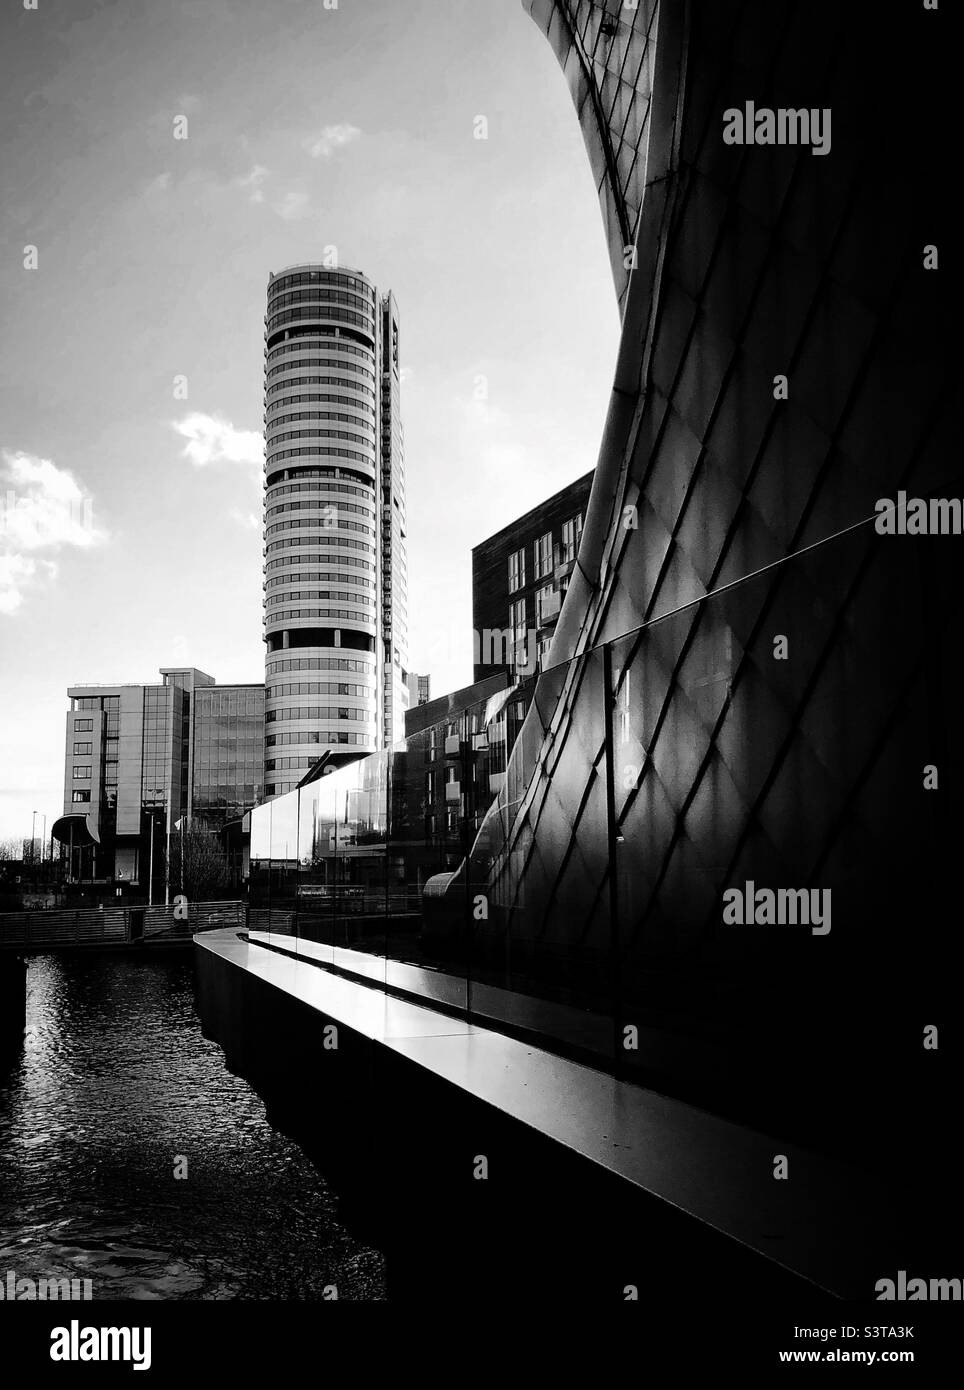 modern architecture in black and white with the tall skyscraper of Bridgewater Place in the city of Leeds at Granary Wharf Stock Photo